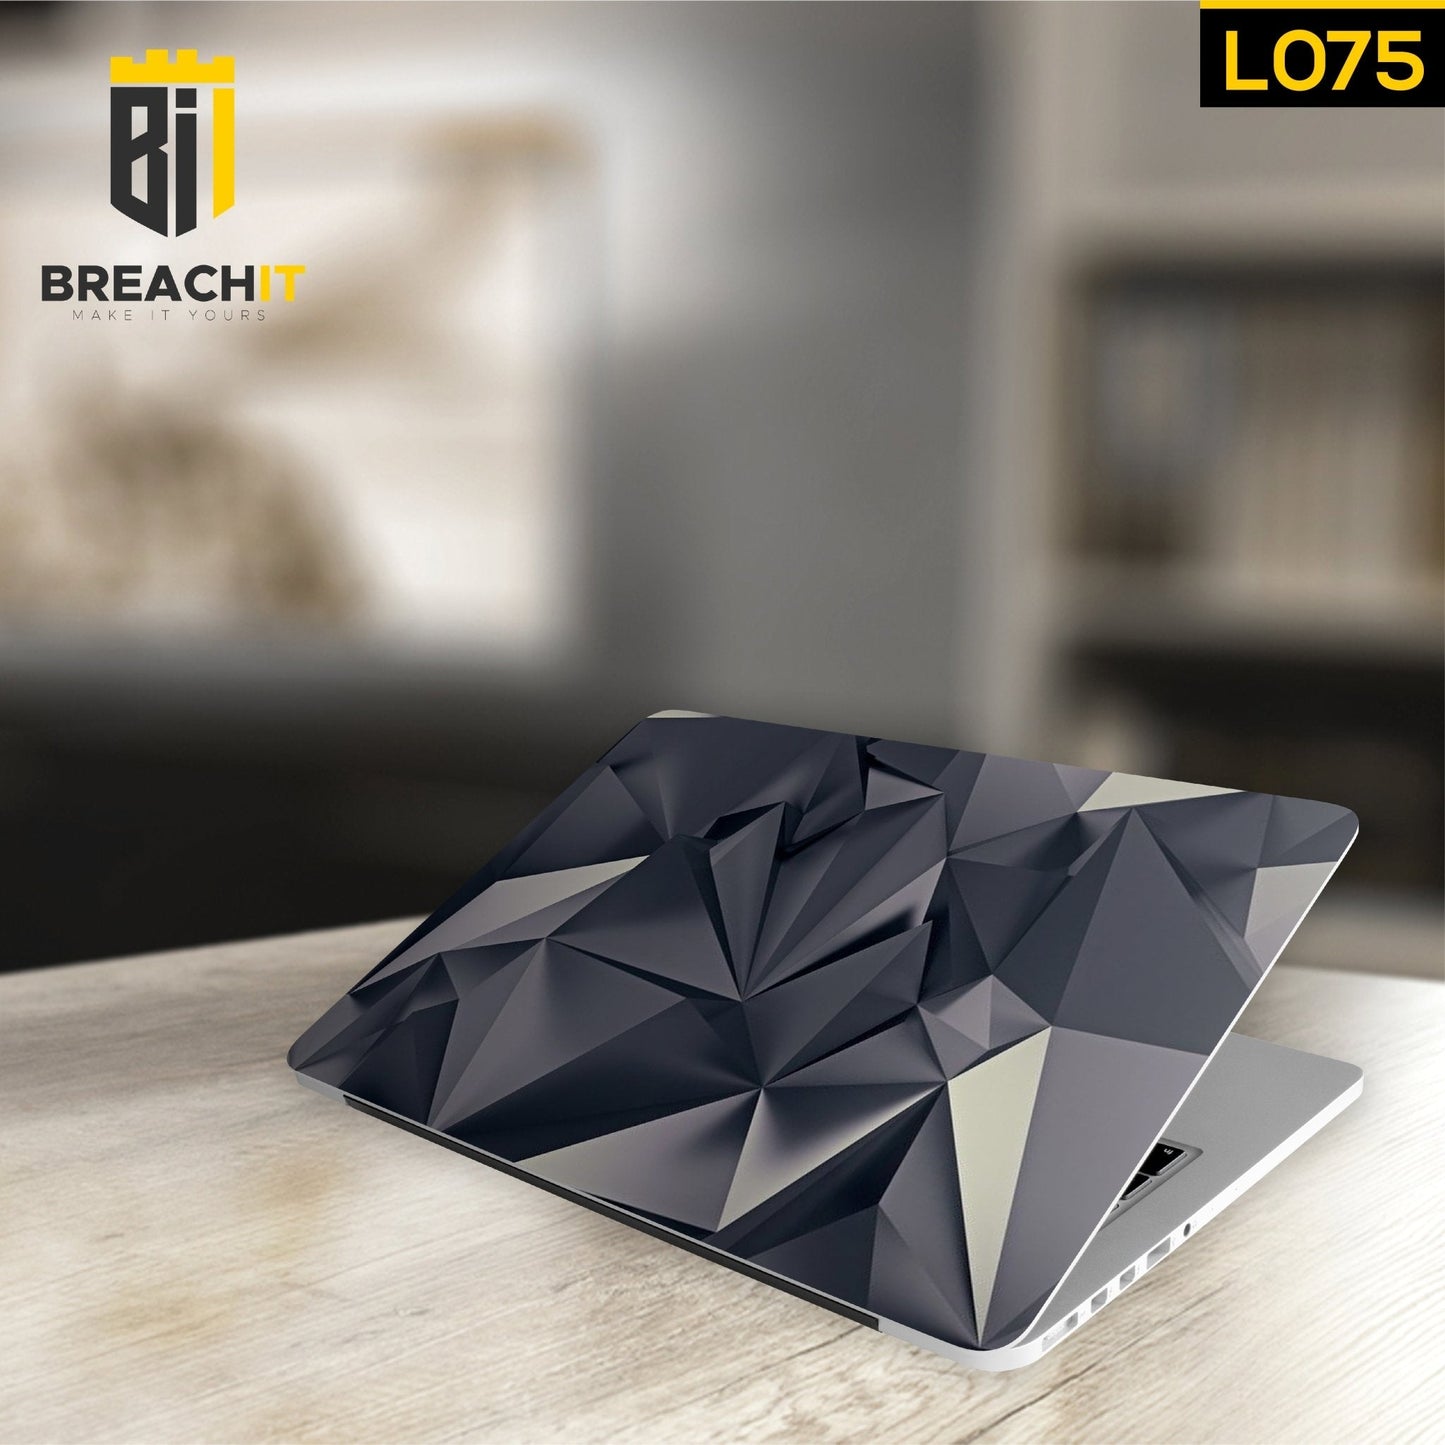 L075 Marble Abstract Laptop Skin - BREACHIT